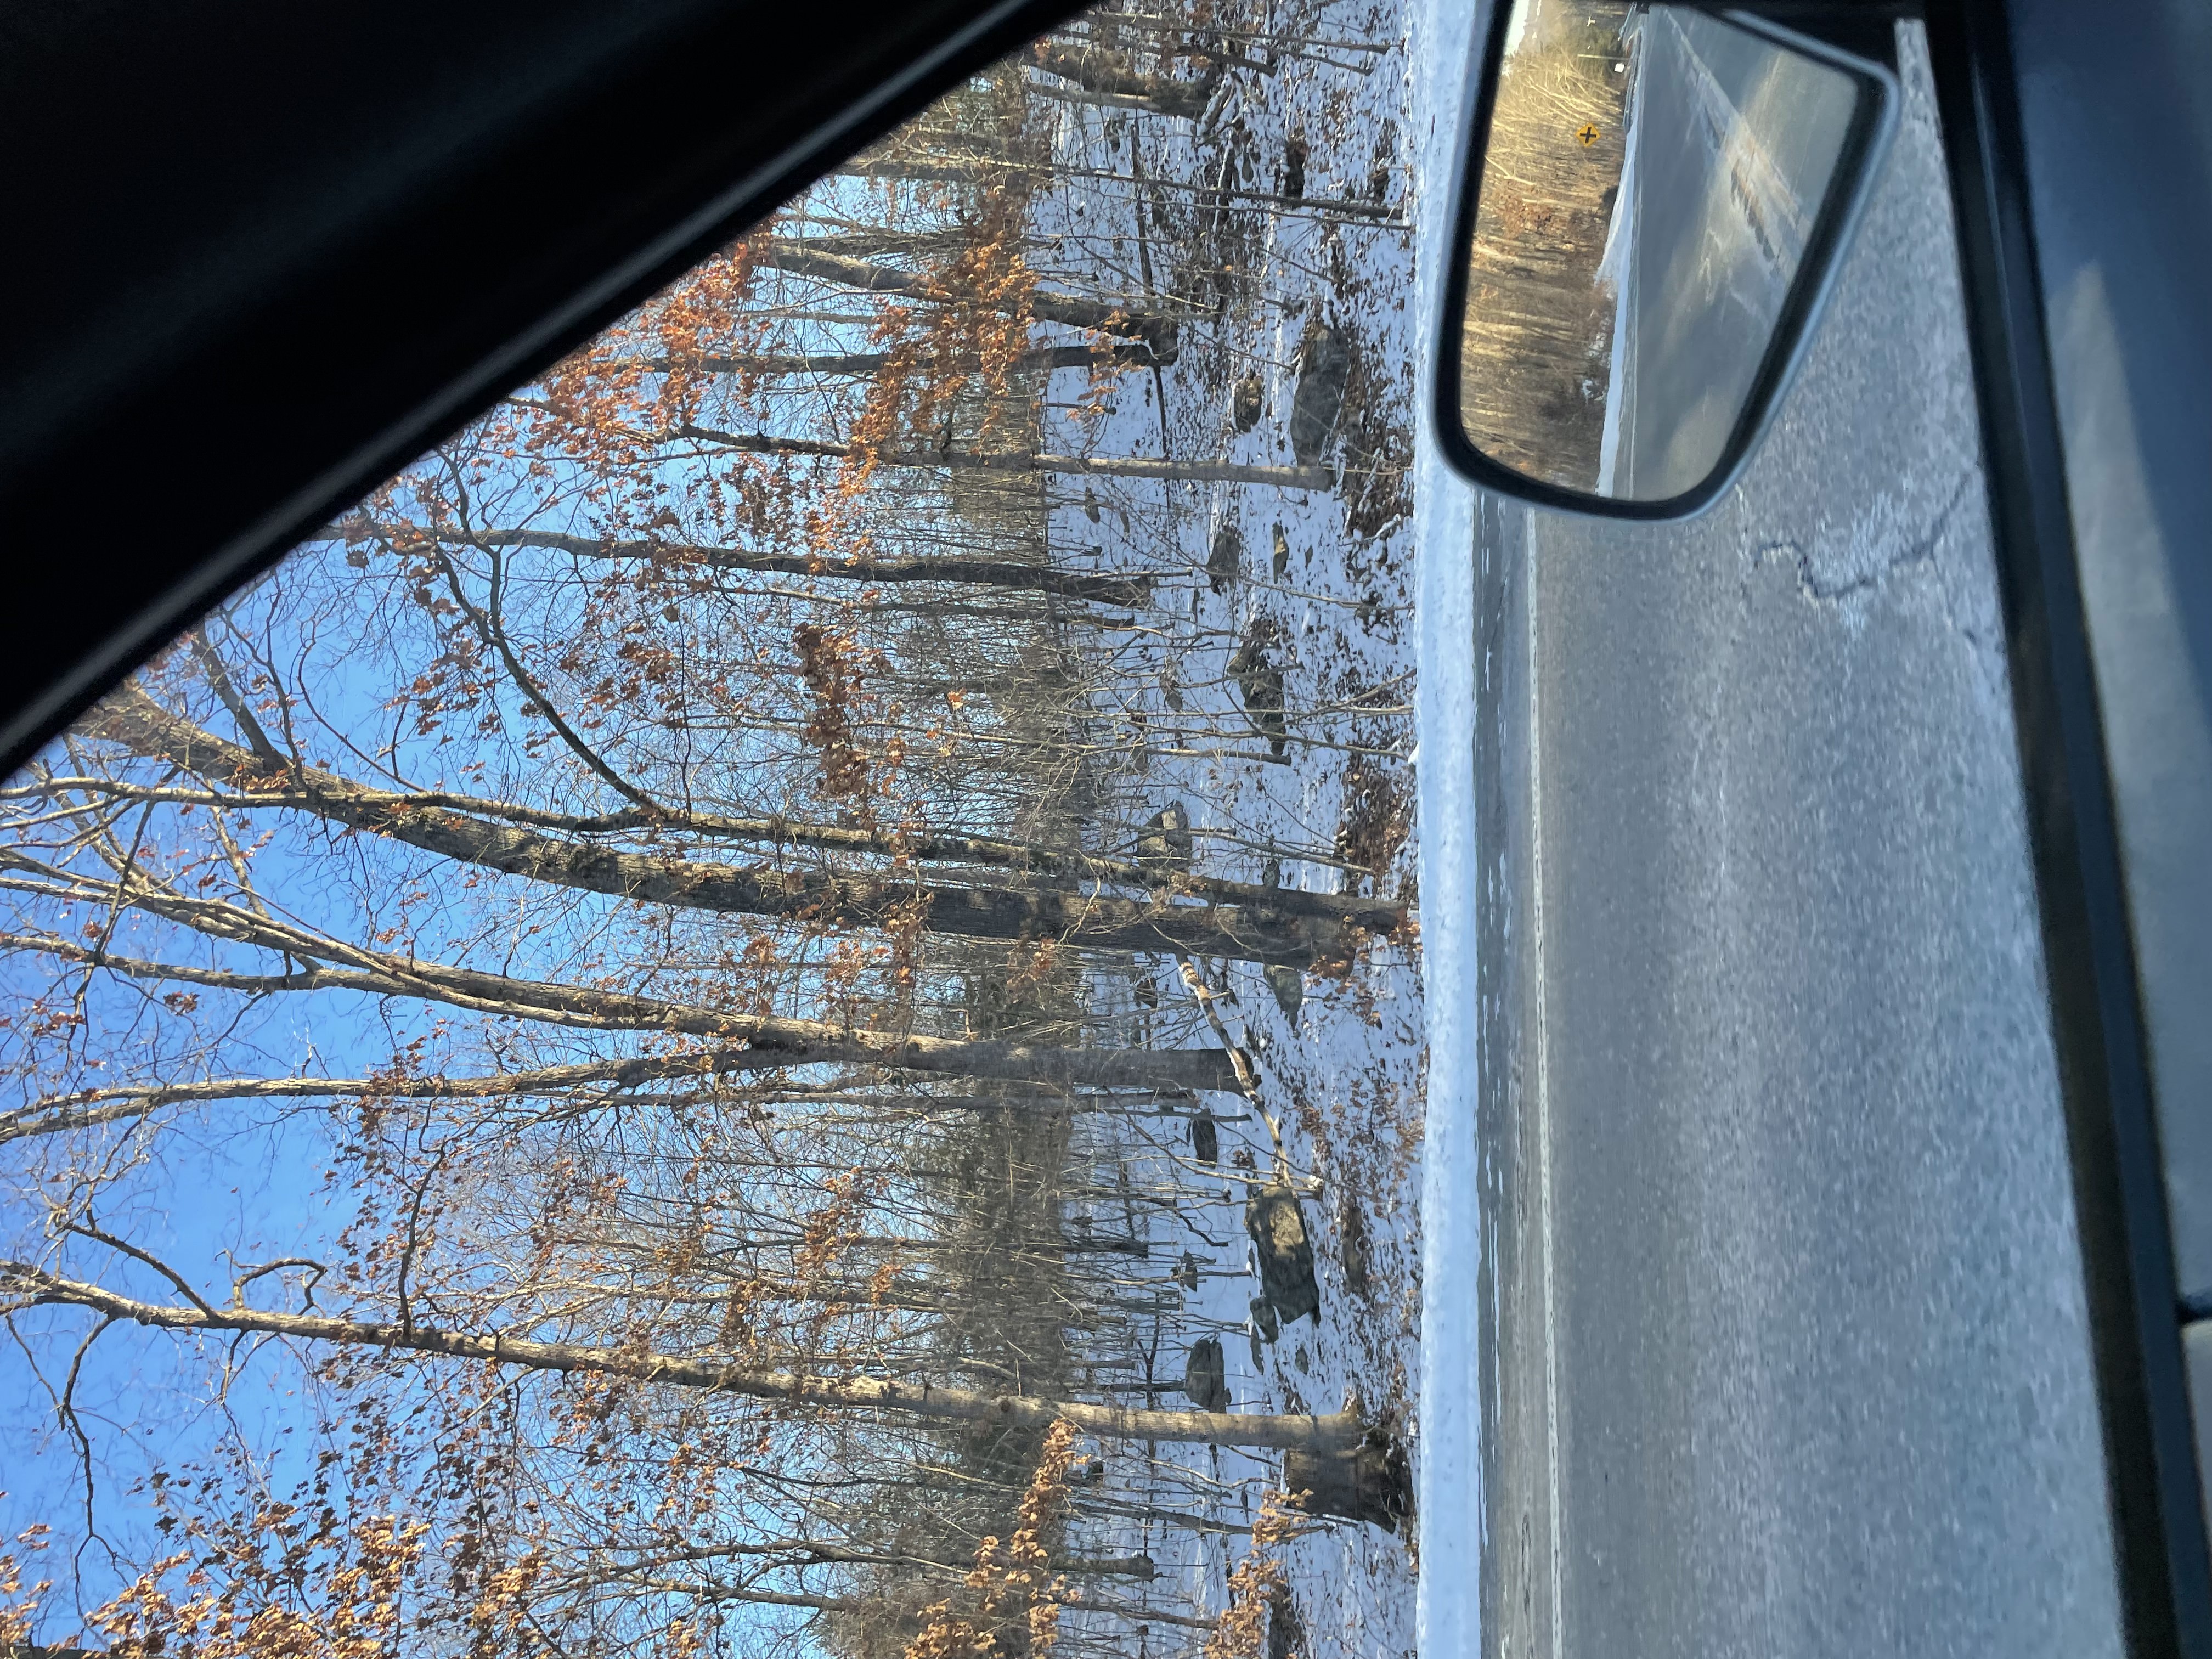 View from driver side window. There are lots of trees, mostly bare with few leaves still attached. There is snow on the ground.